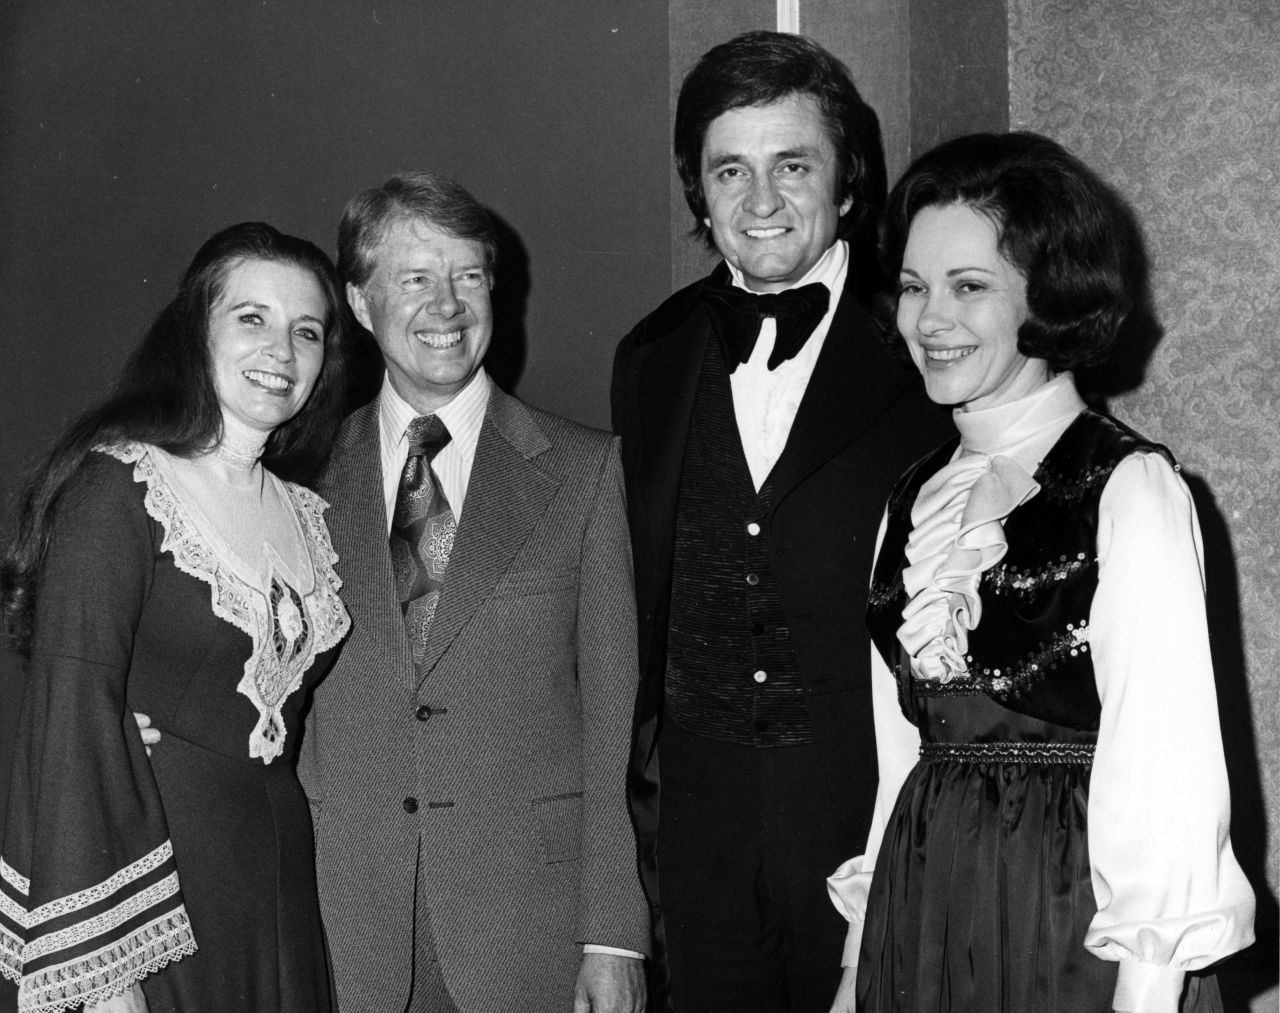 Johnny Cash was another artist with whom Carter was both a fan and a friend -- and maybe even family, as <a href="https://www.presidency.ucsb.edu/documents/conference-hire-remarks-participants-the-conference" target="_blank" target="_blank">the long-running joke goes</a>. "I was glad when he brought June Cash (left) down here to meet me," Carter says in the film. "We always claimed that she was my cousin."